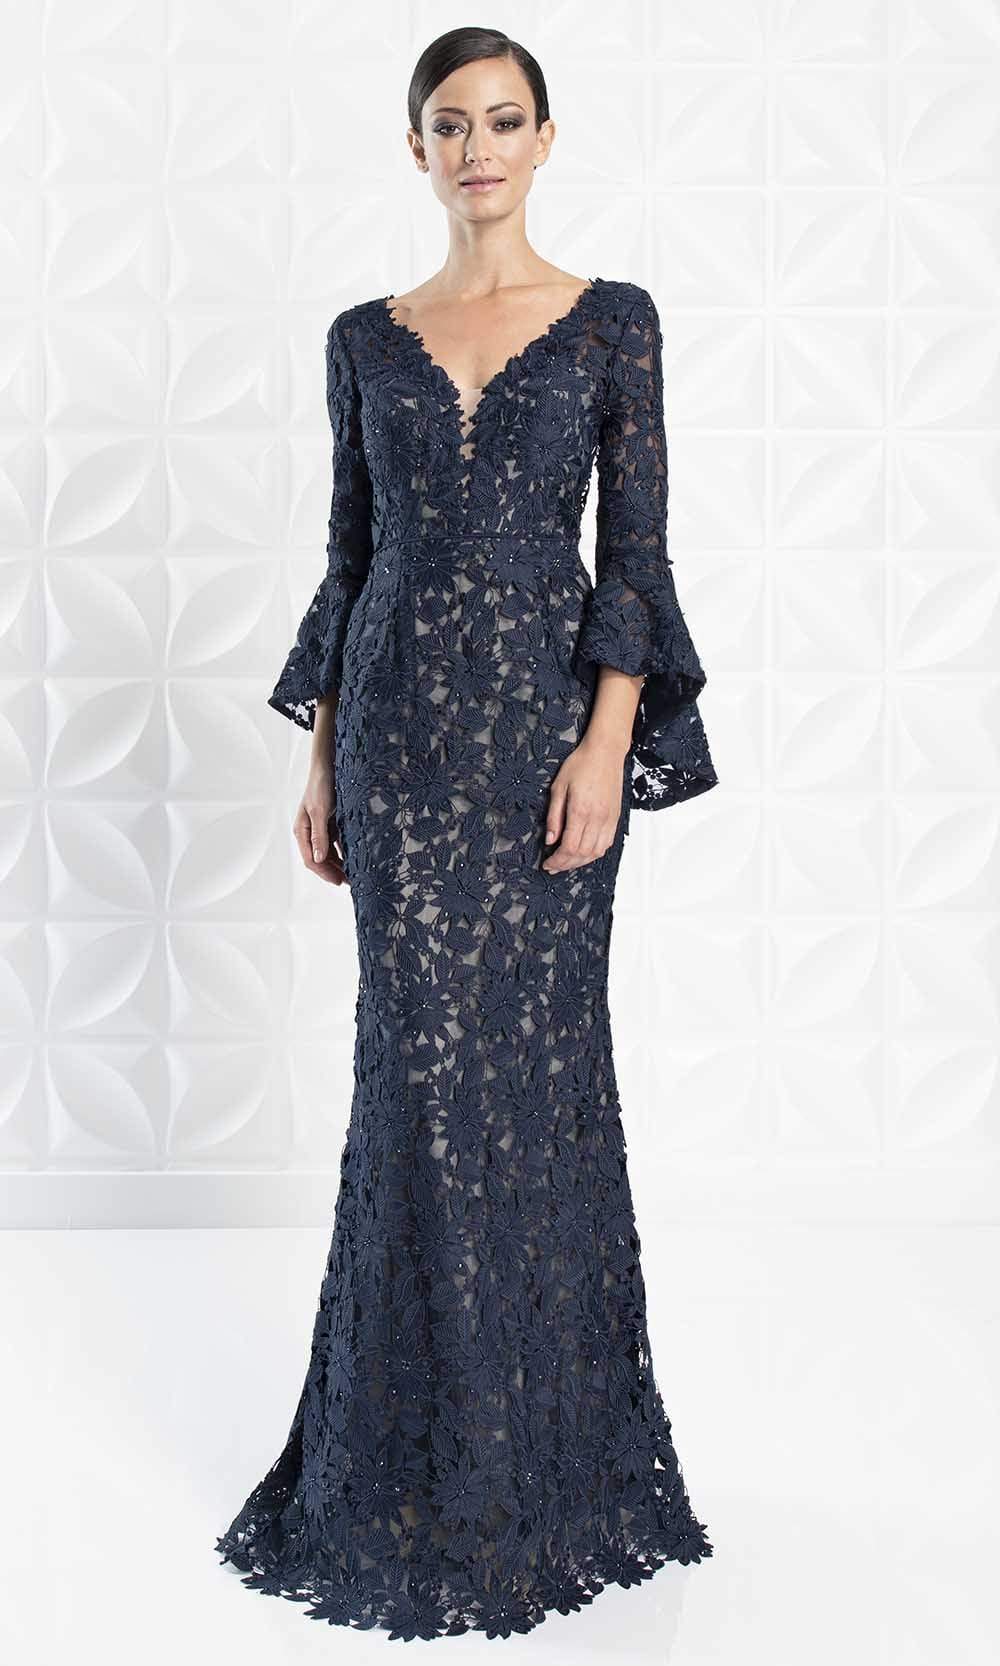 Alexander By Daymor - 1276 Circular Flounce V-Neck Floral Lace Gown Mother of the Bride Dresses 6 / Navy